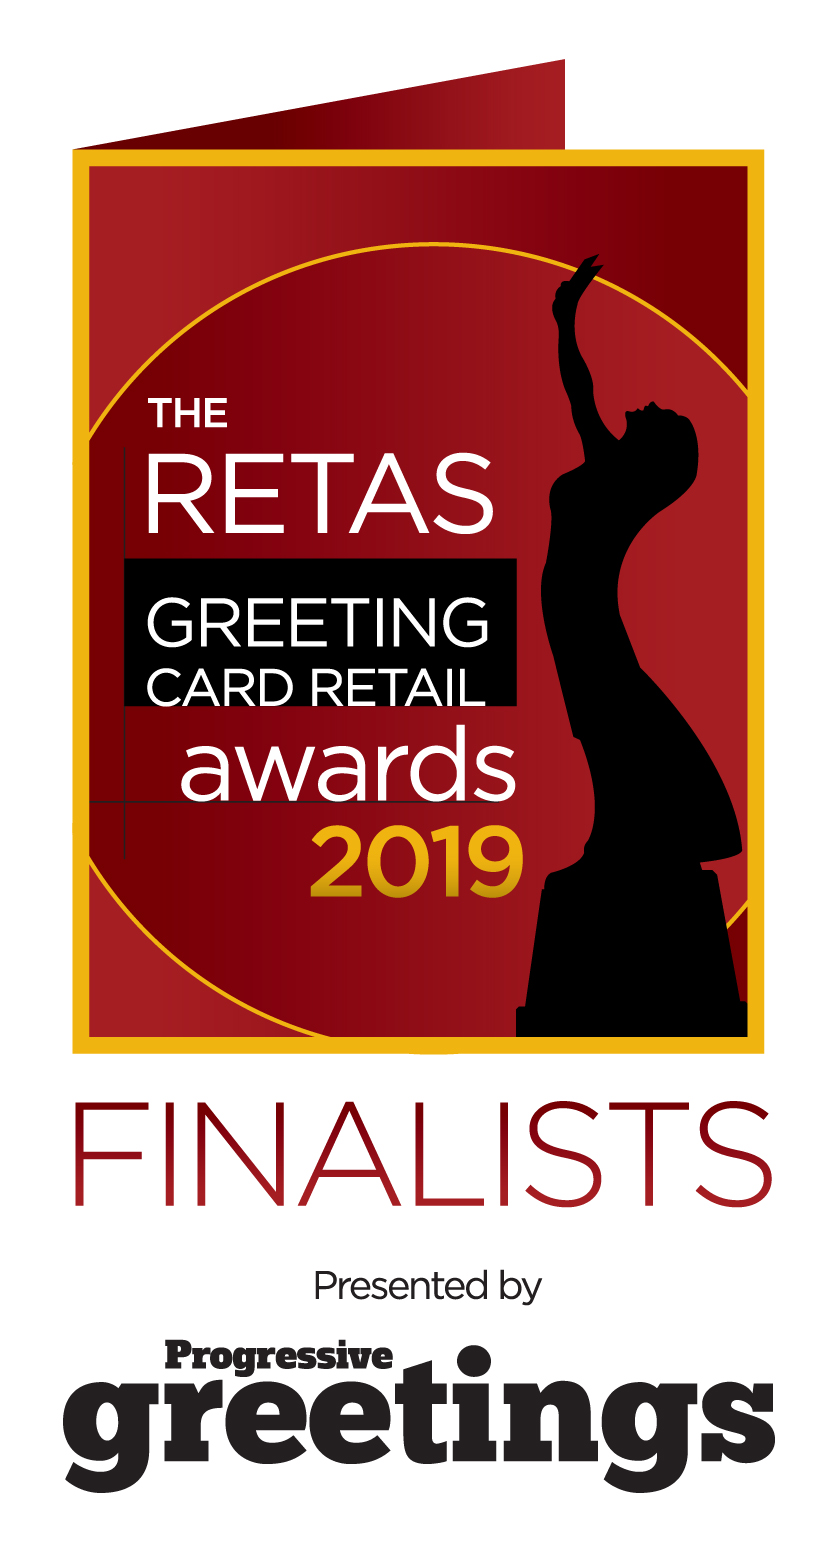 Above: The Retas finalists were announced recently. 